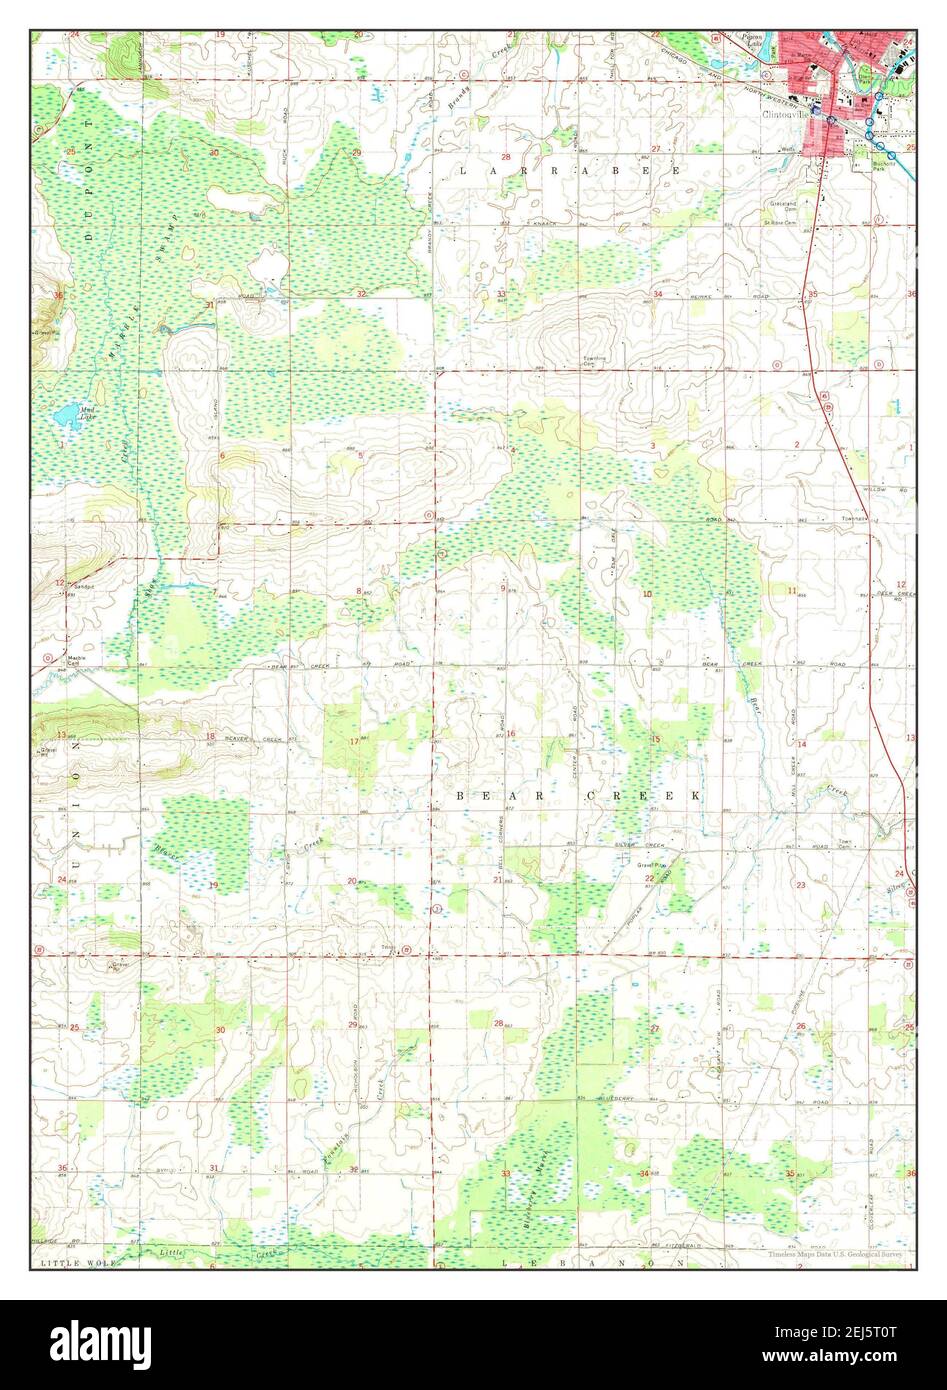 Clintonville South, Wisconsin, map 1970, 1:24000, United States of America by Timeless Maps, data U.S. Geological Survey Stock Photo